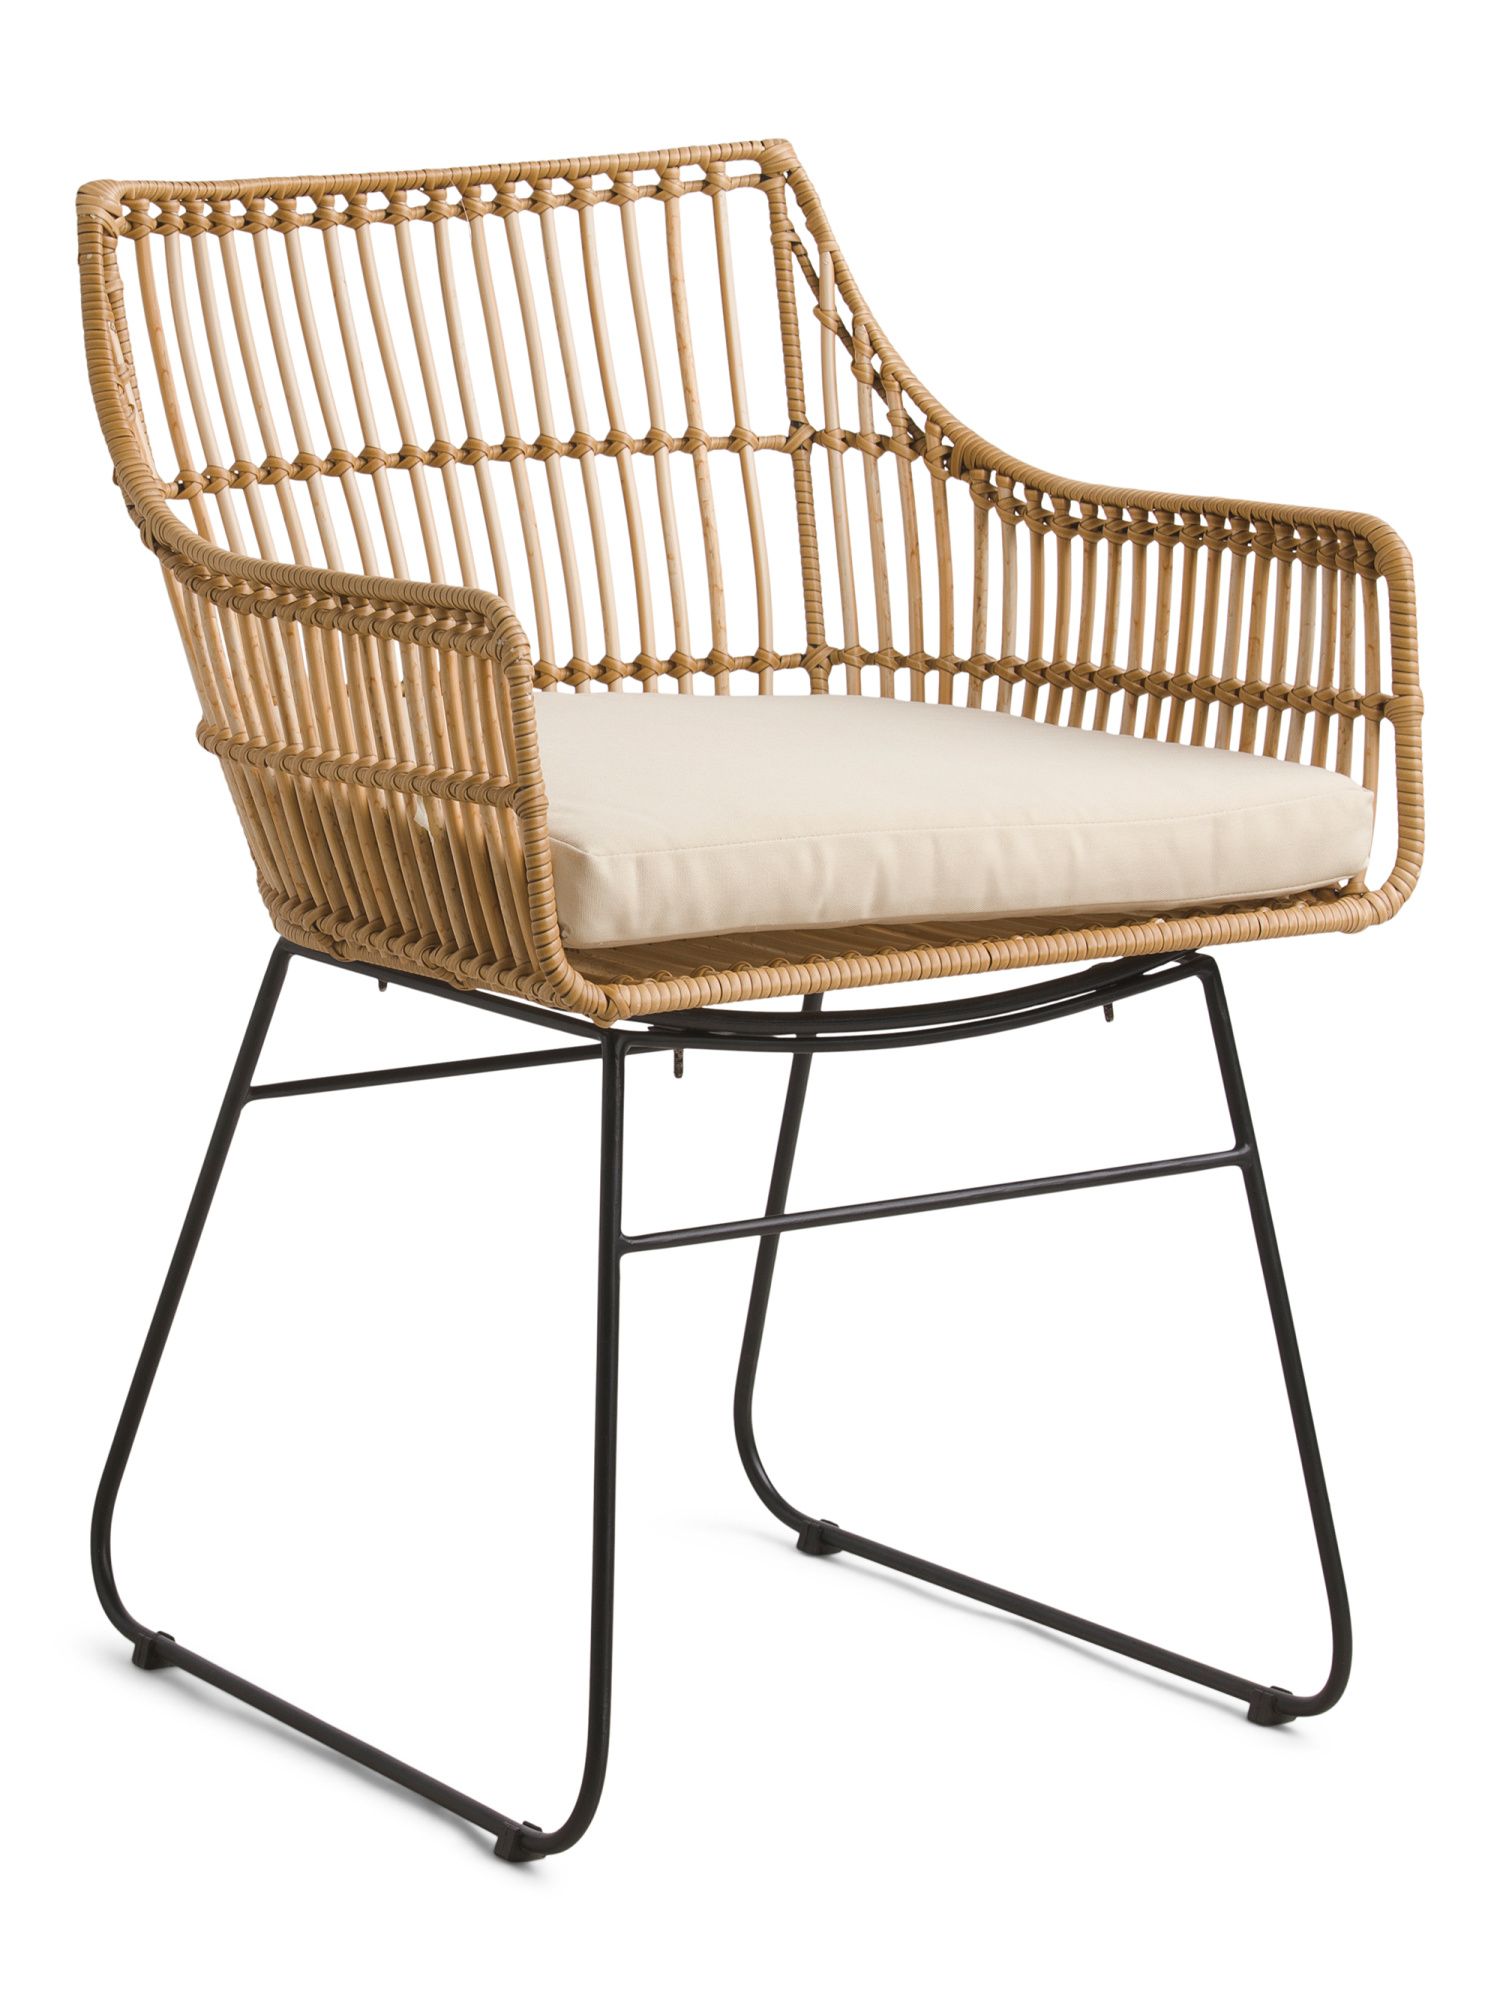 Russo Woven Metal Frame Dining Chair | TJ Maxx